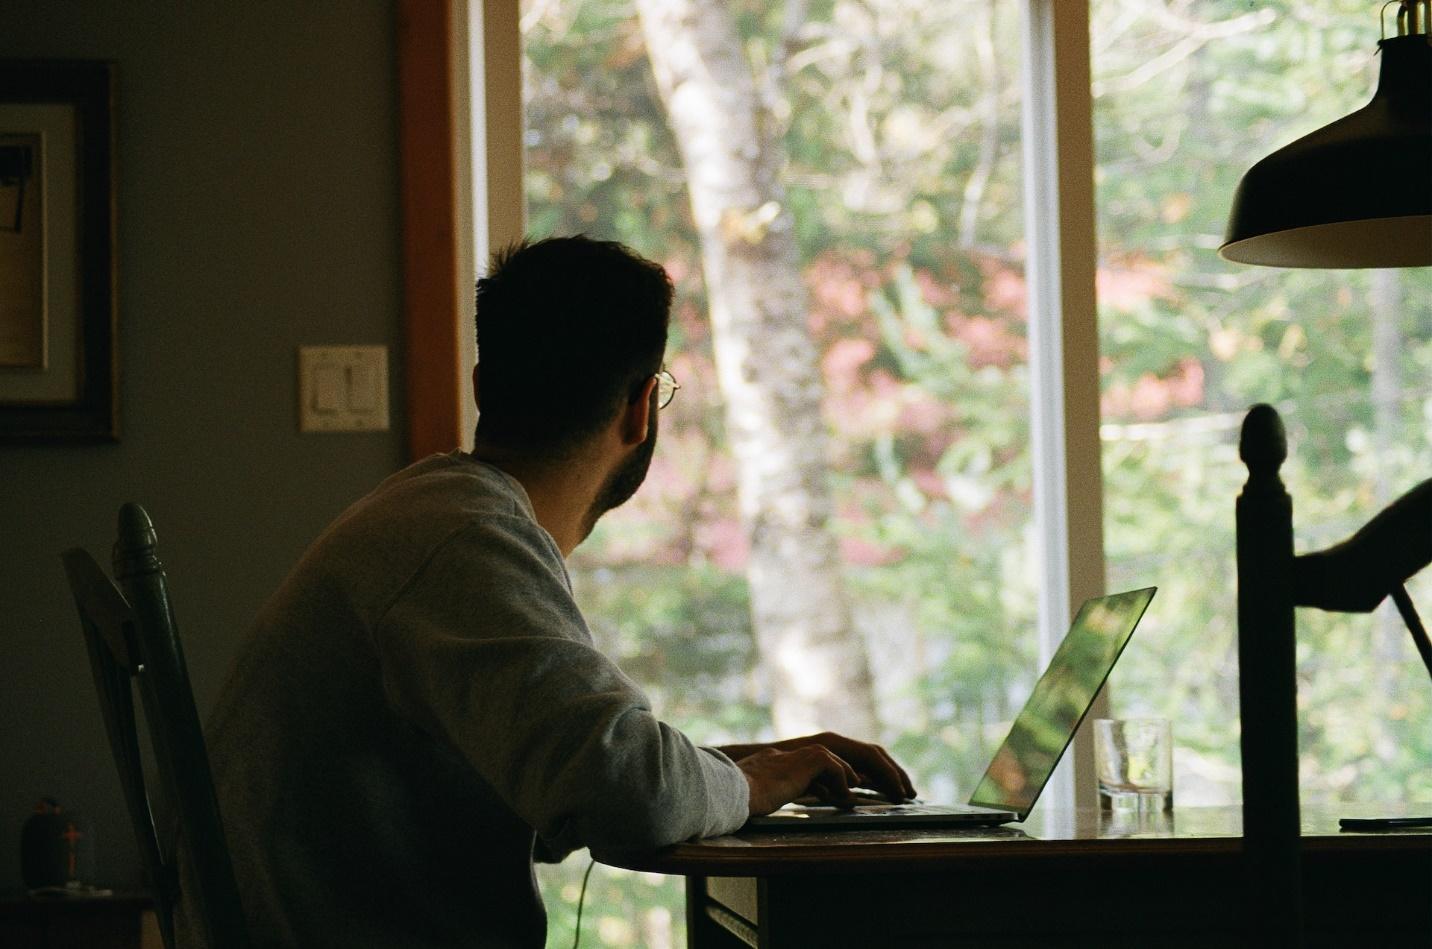 A remote worker working from home